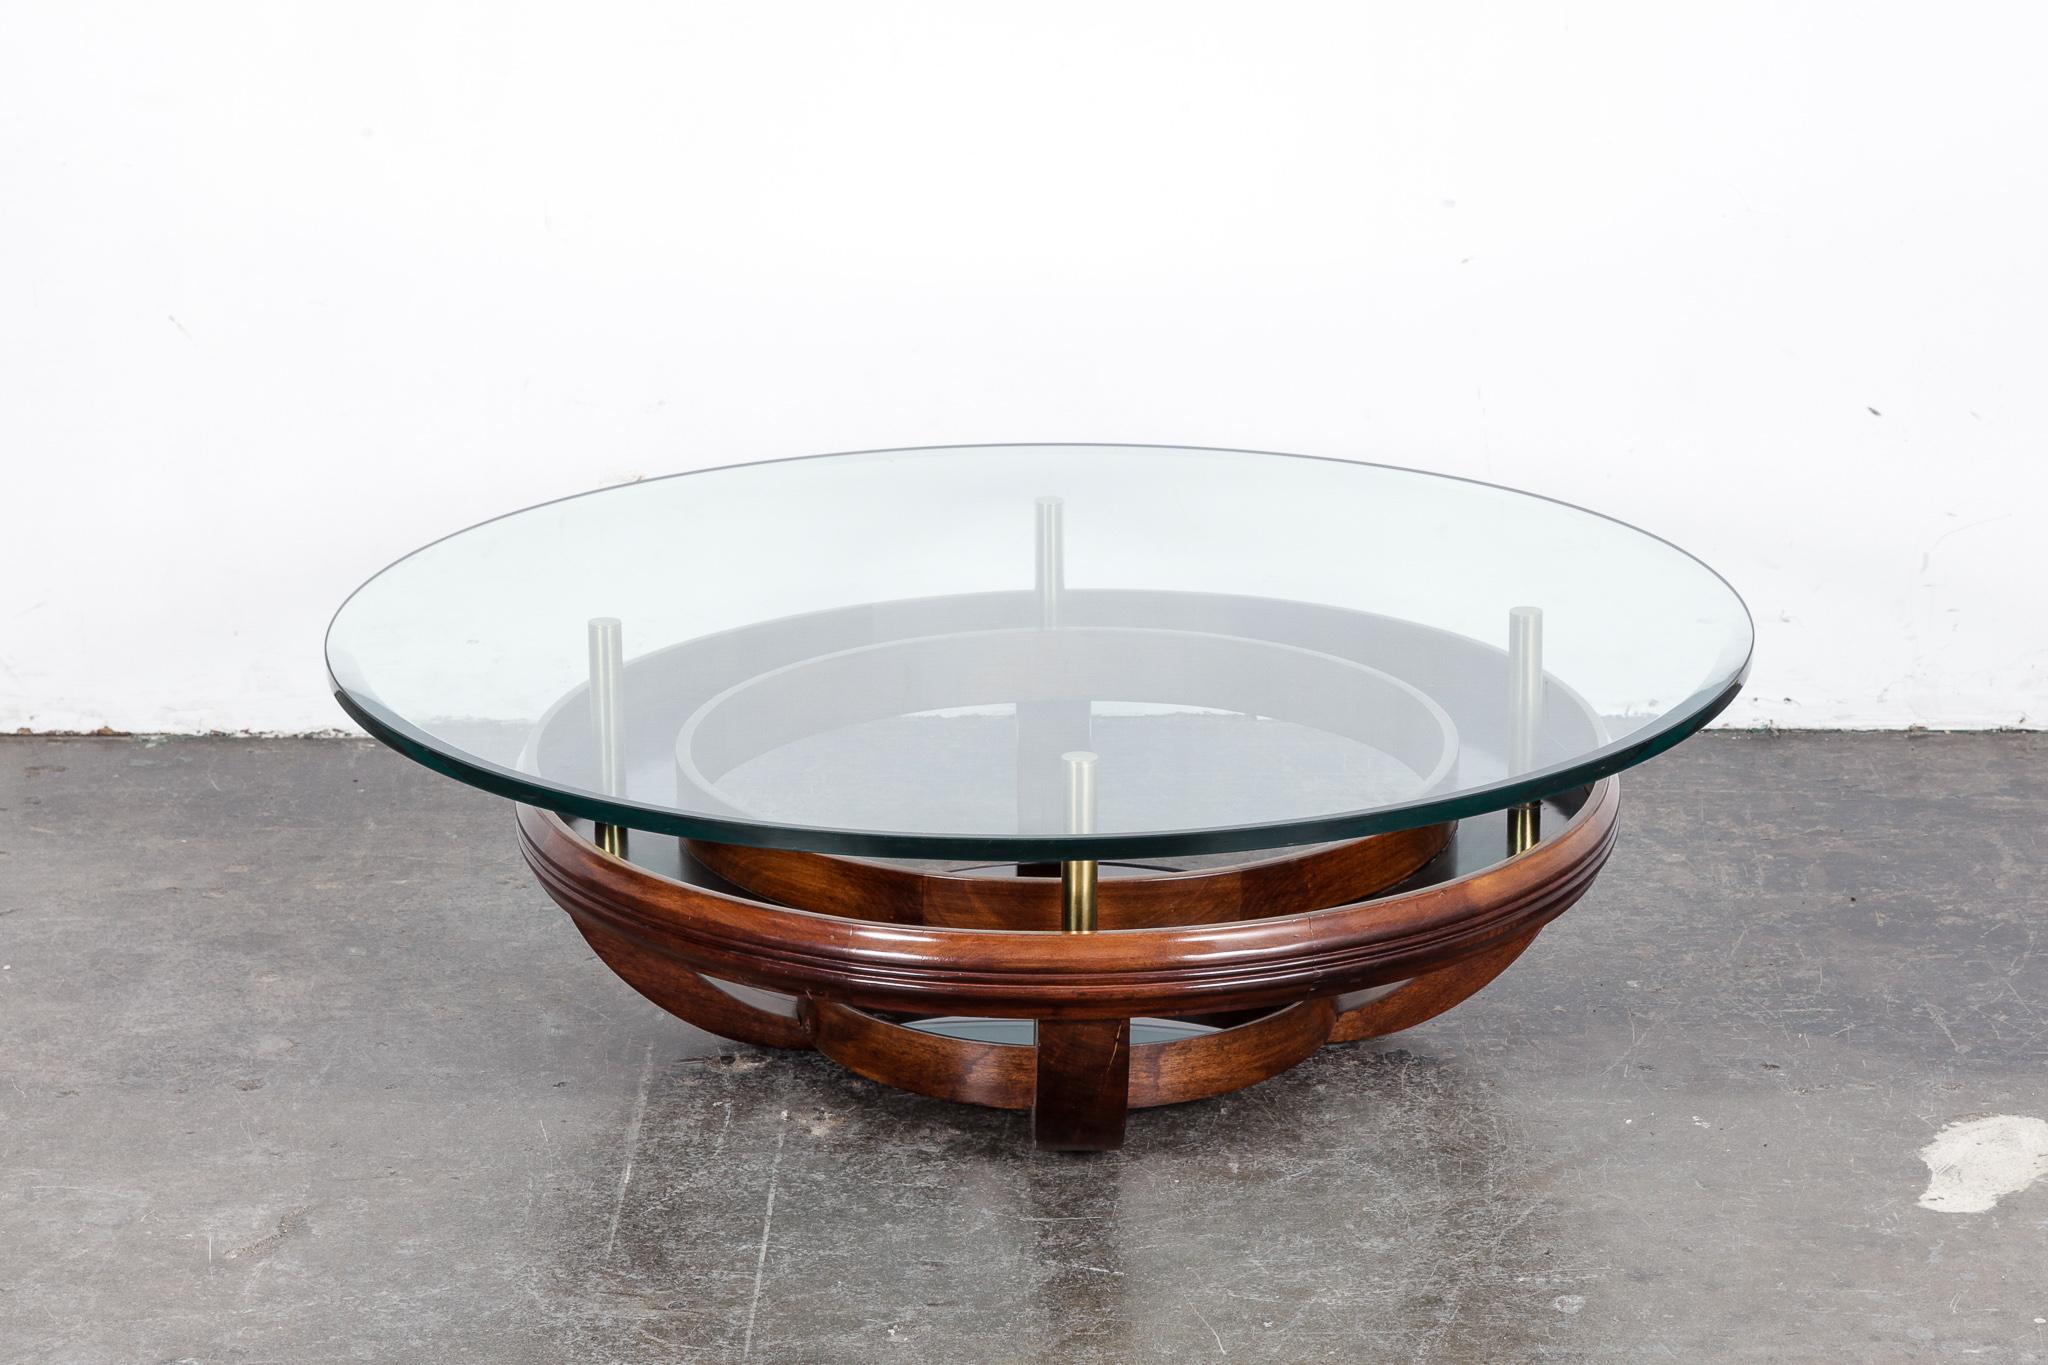 Brazilian bi-level round coffee table with brass supported glass top and black lacquered inside ring, wood base. 1960s. Original glass top.